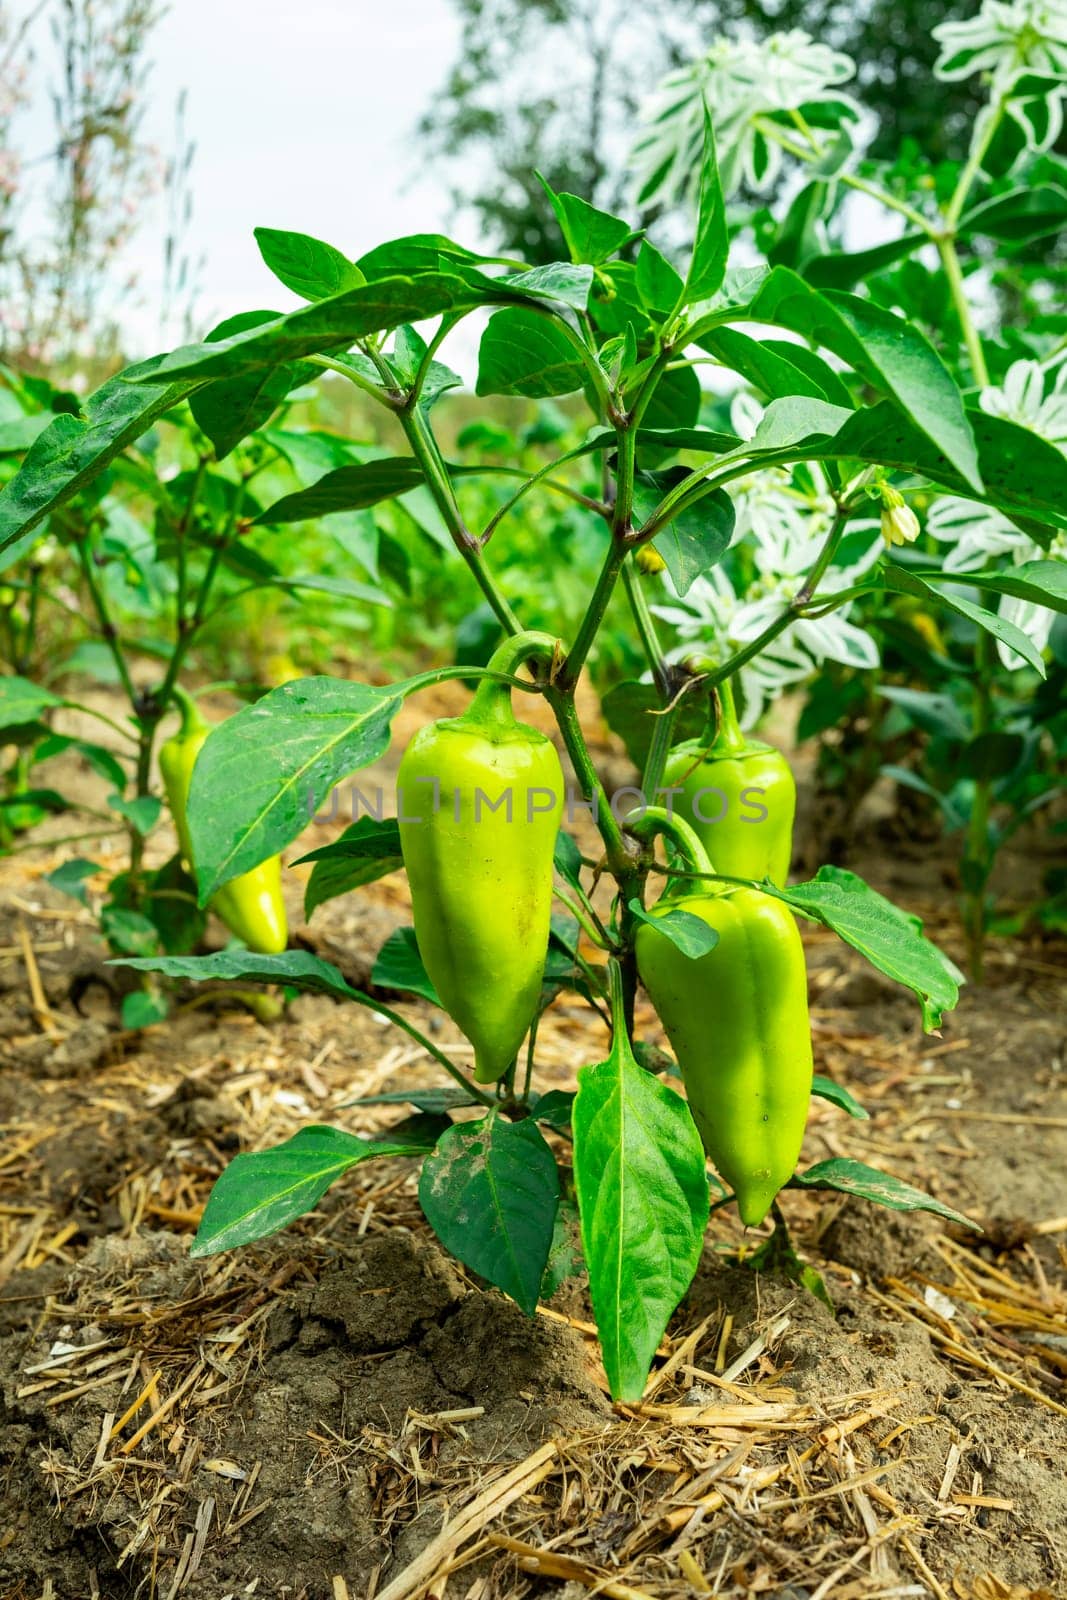 Cultivation of green pepper. Several pepper fruits on a green bush.